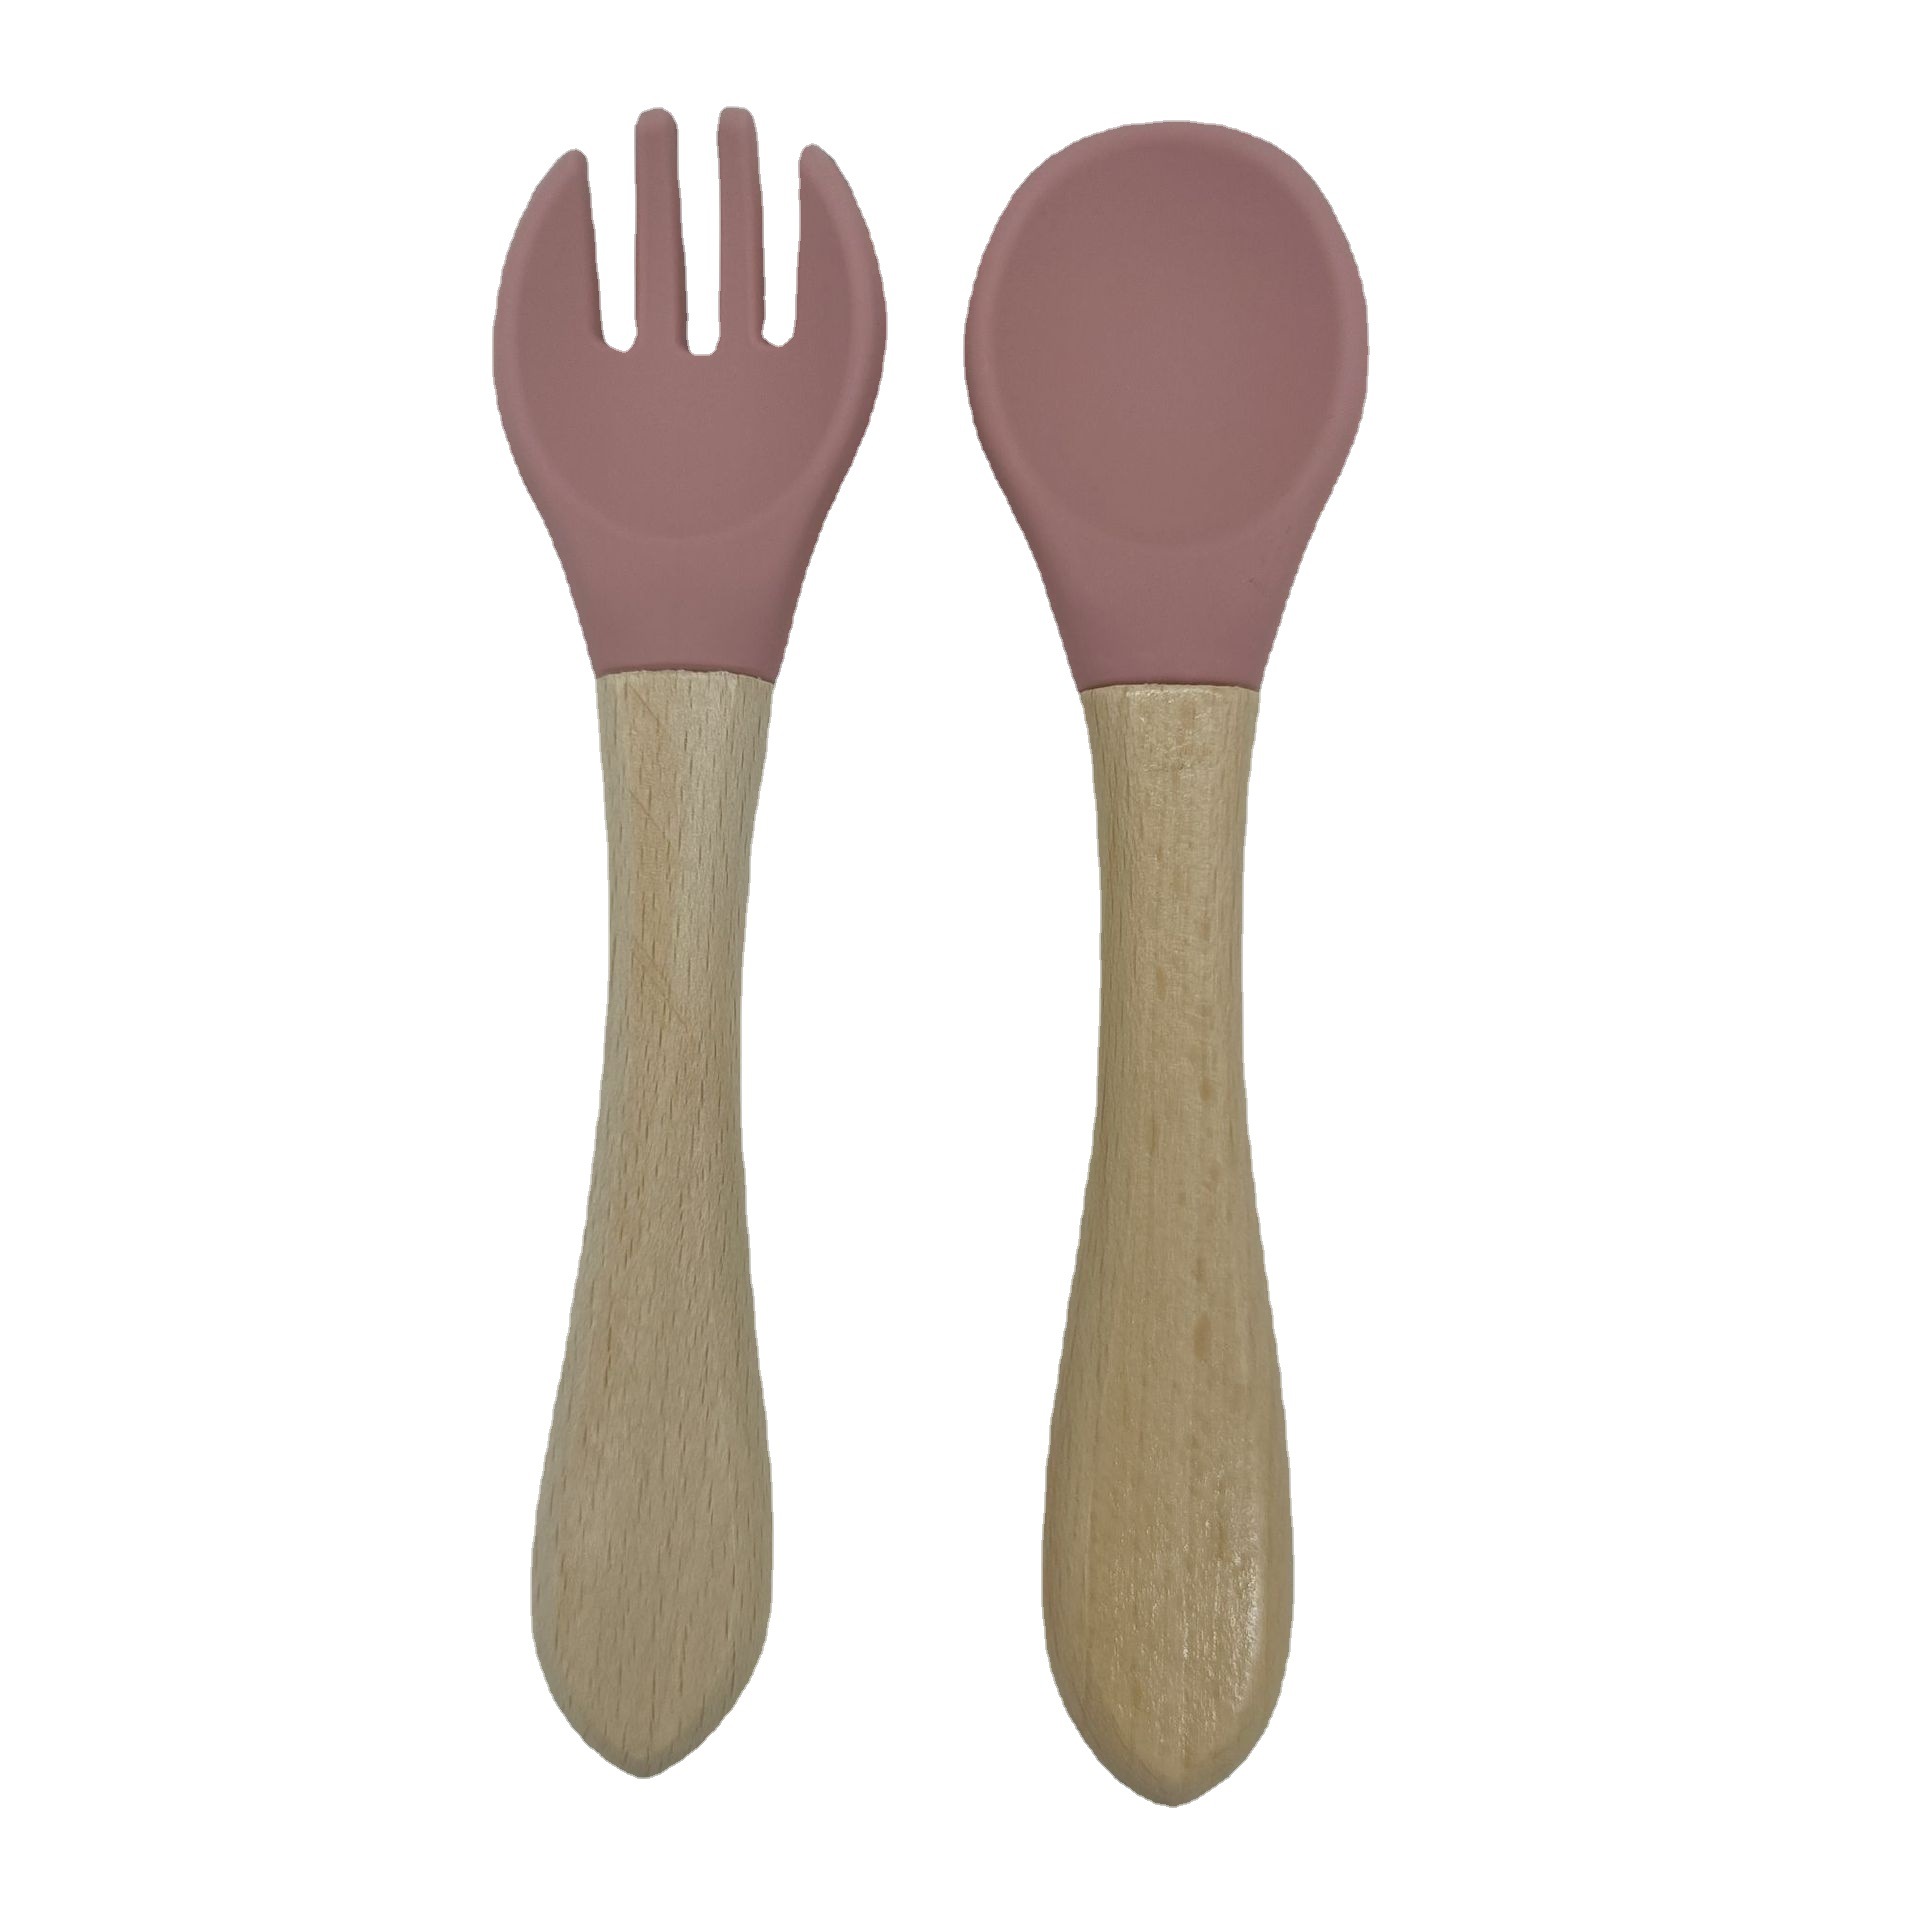 spot supply wooden handle spoon fork infant child learning eating spoon baby learning food training silicone spoon feeding tableware